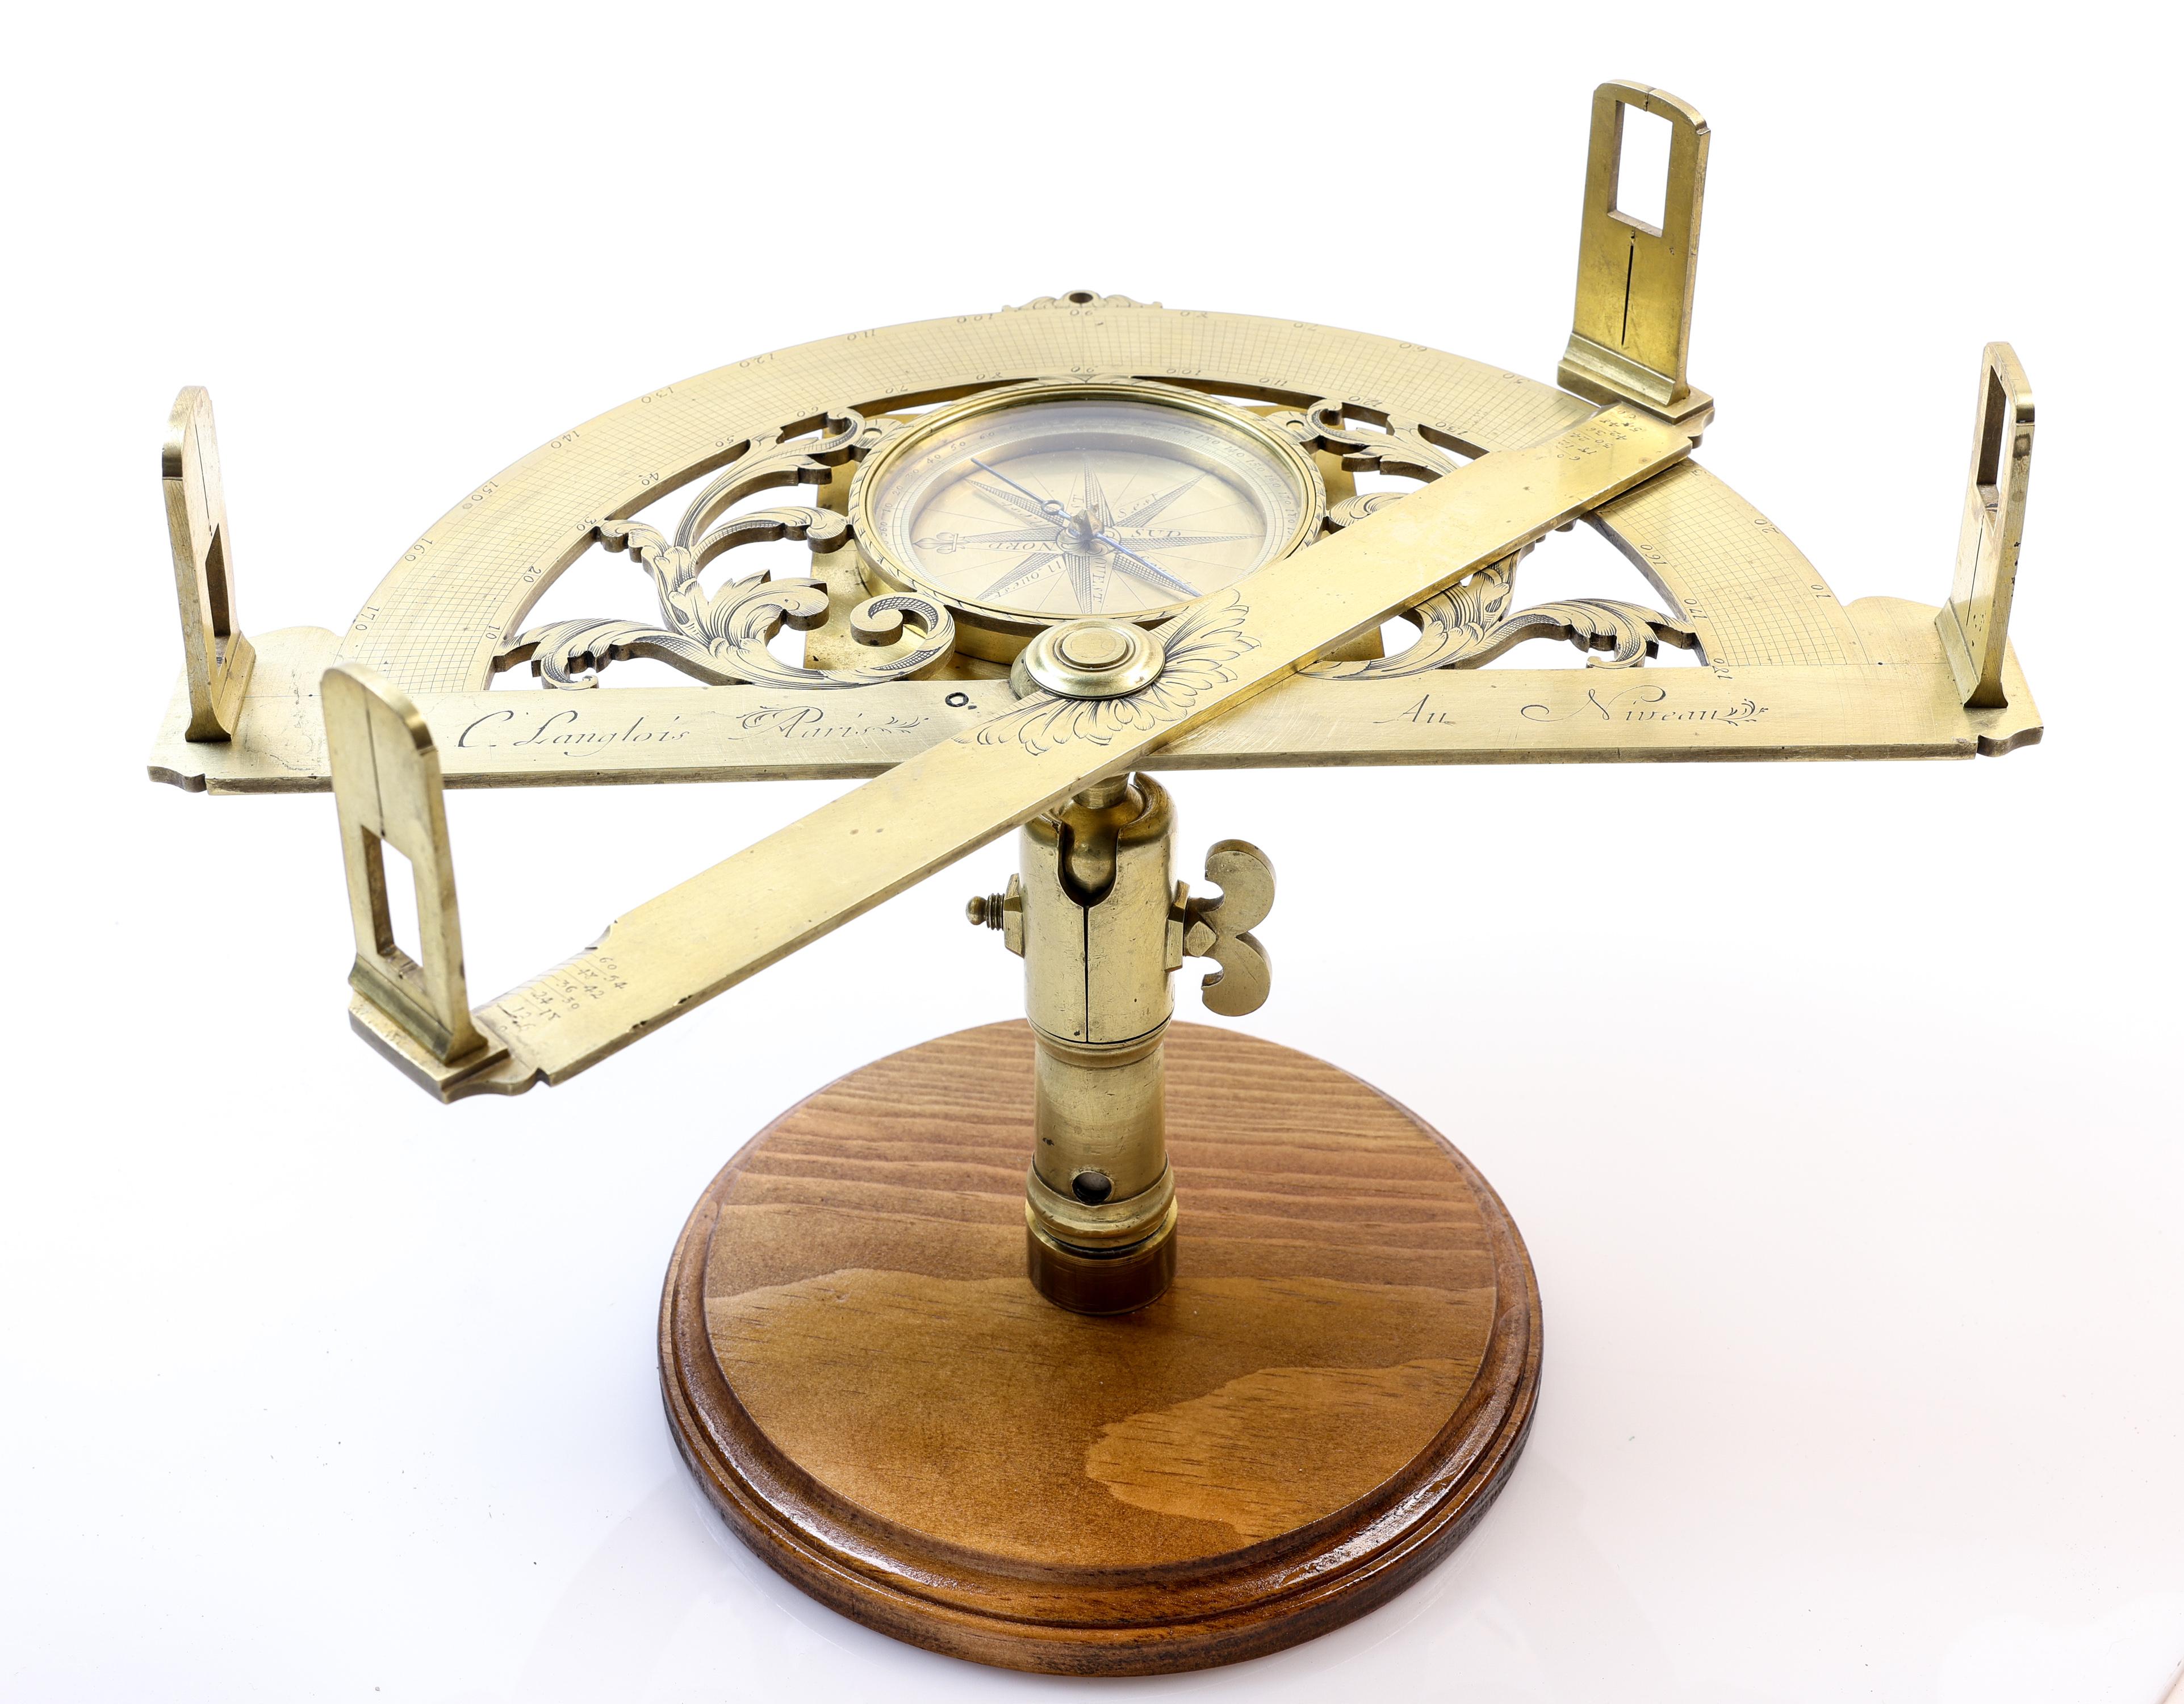 This is a BEAUTIFUL Graphometer made by the premier instrument maker in France, Claude Langlois, after Bion and Butterfield had stopped making instruments.

As discussed on my Graphometer - Semicircle webpage, the French produced a good number of